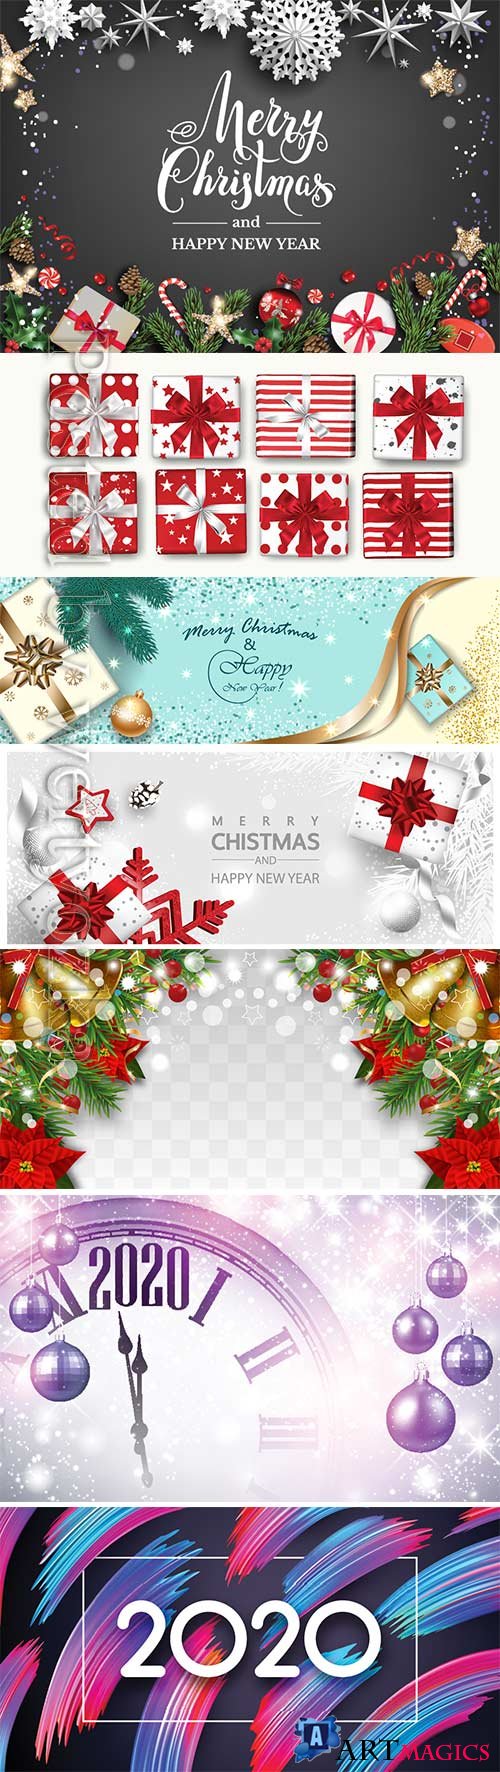 2020 Merry Chistmas and Happy New Year vector illustration # 14